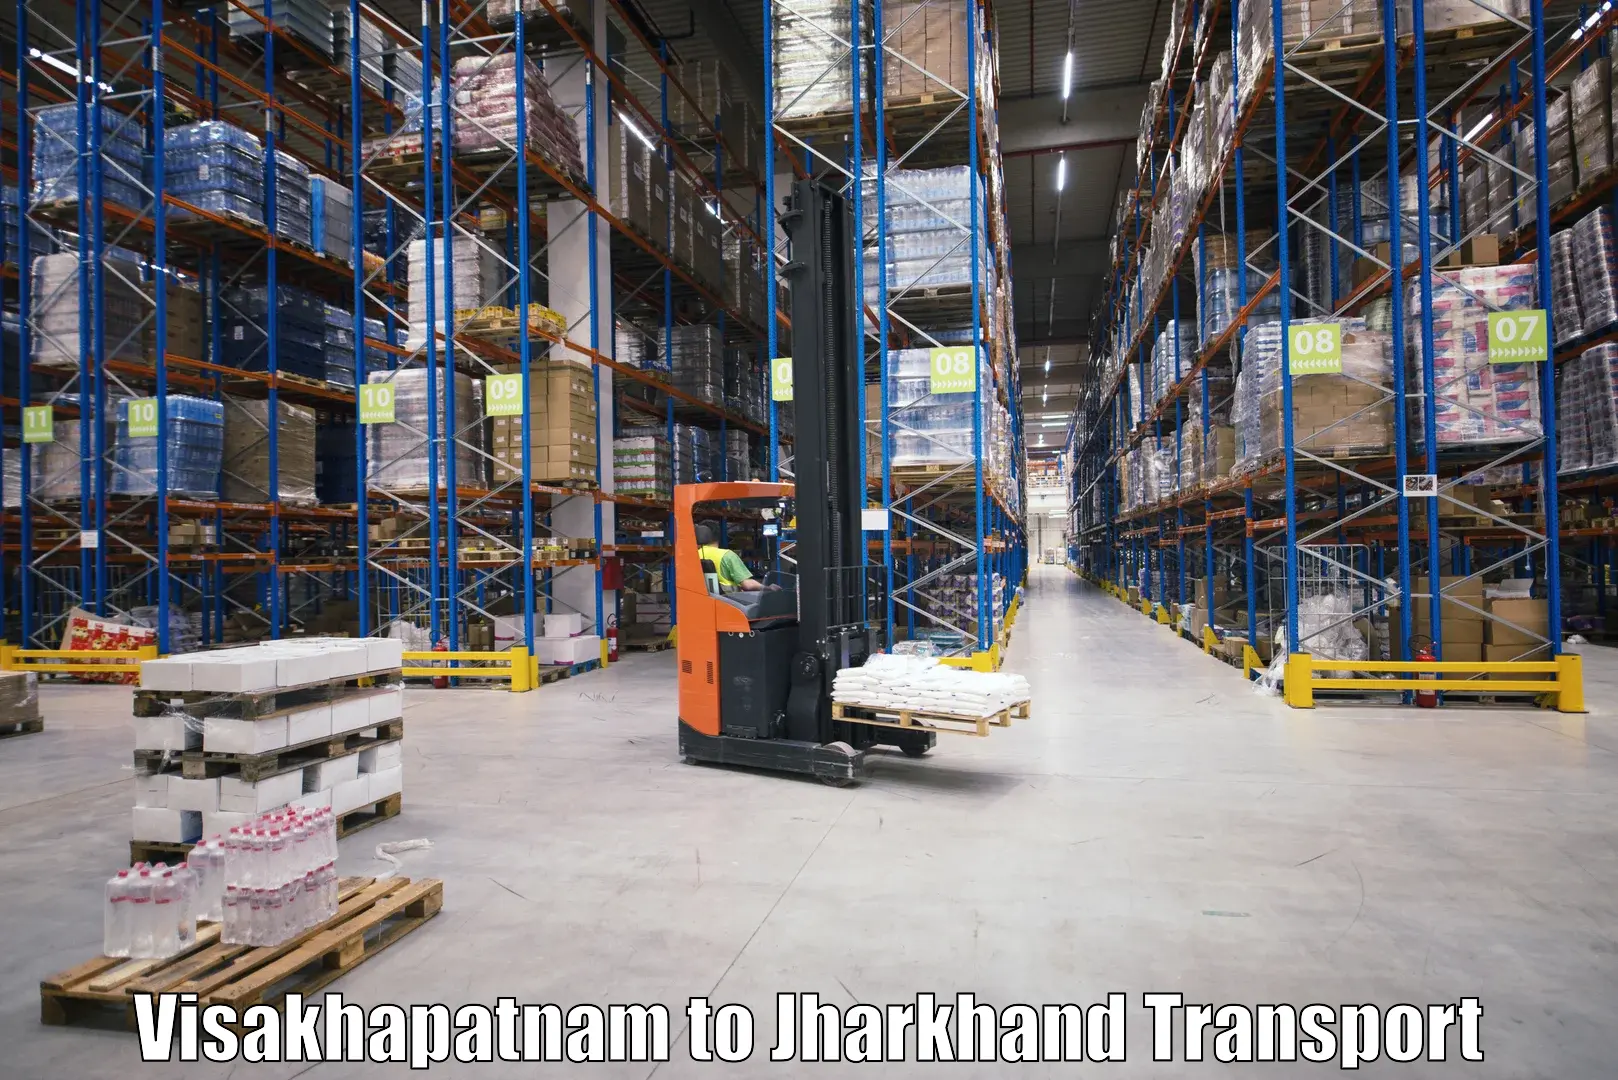 Commercial transport service Visakhapatnam to Jharia